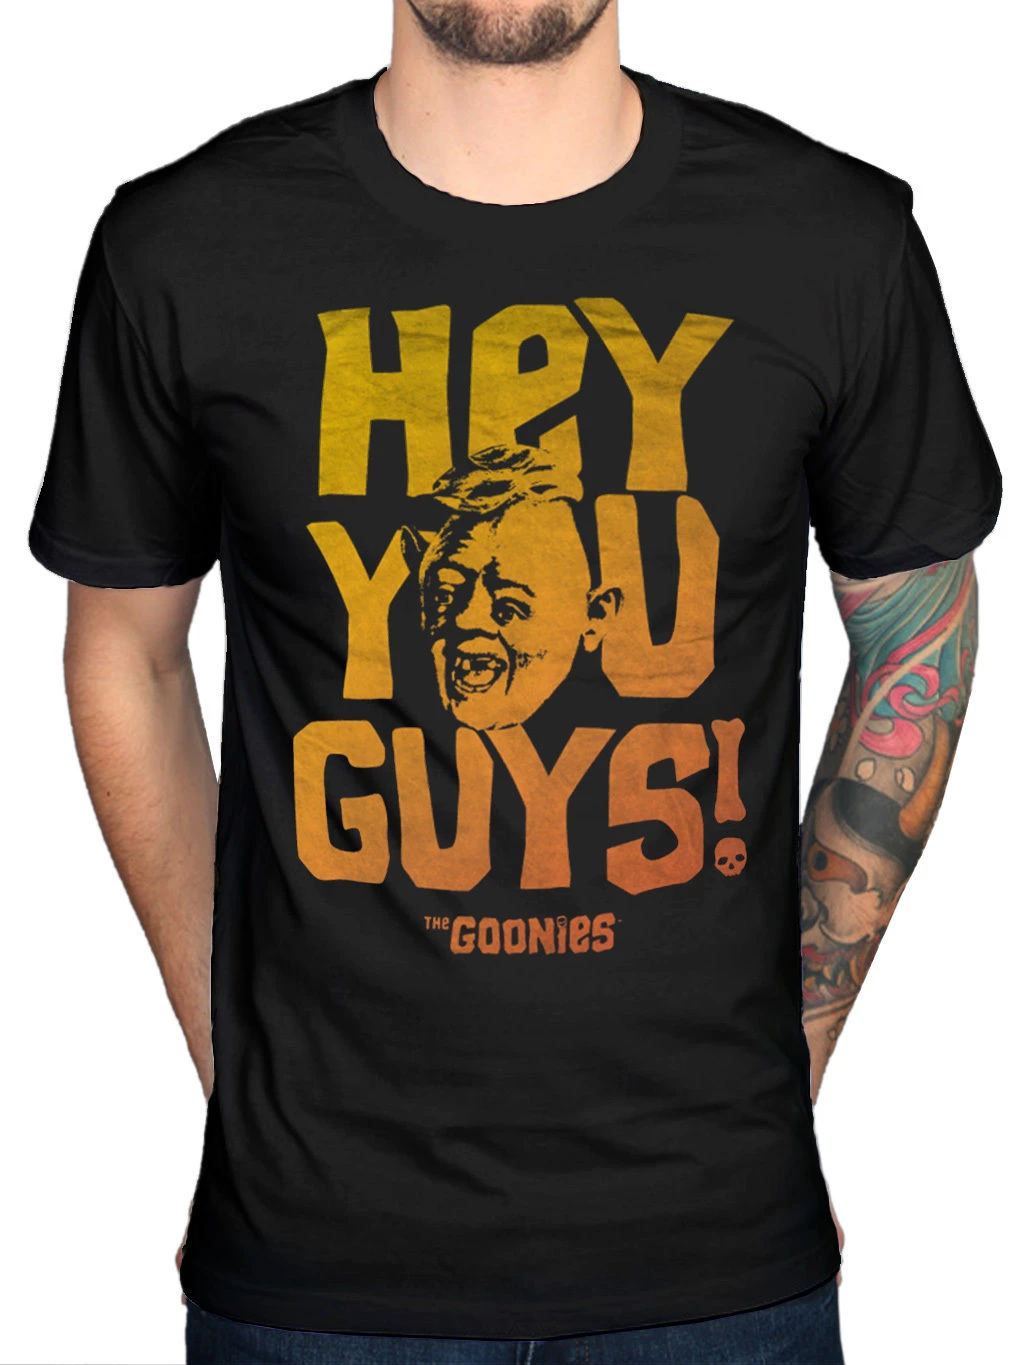 Official The Goonies Sloth Hey You Guys Distressed Retro T Shirt Movie Design T Shirt Men S High Quality Selling Aliexpress